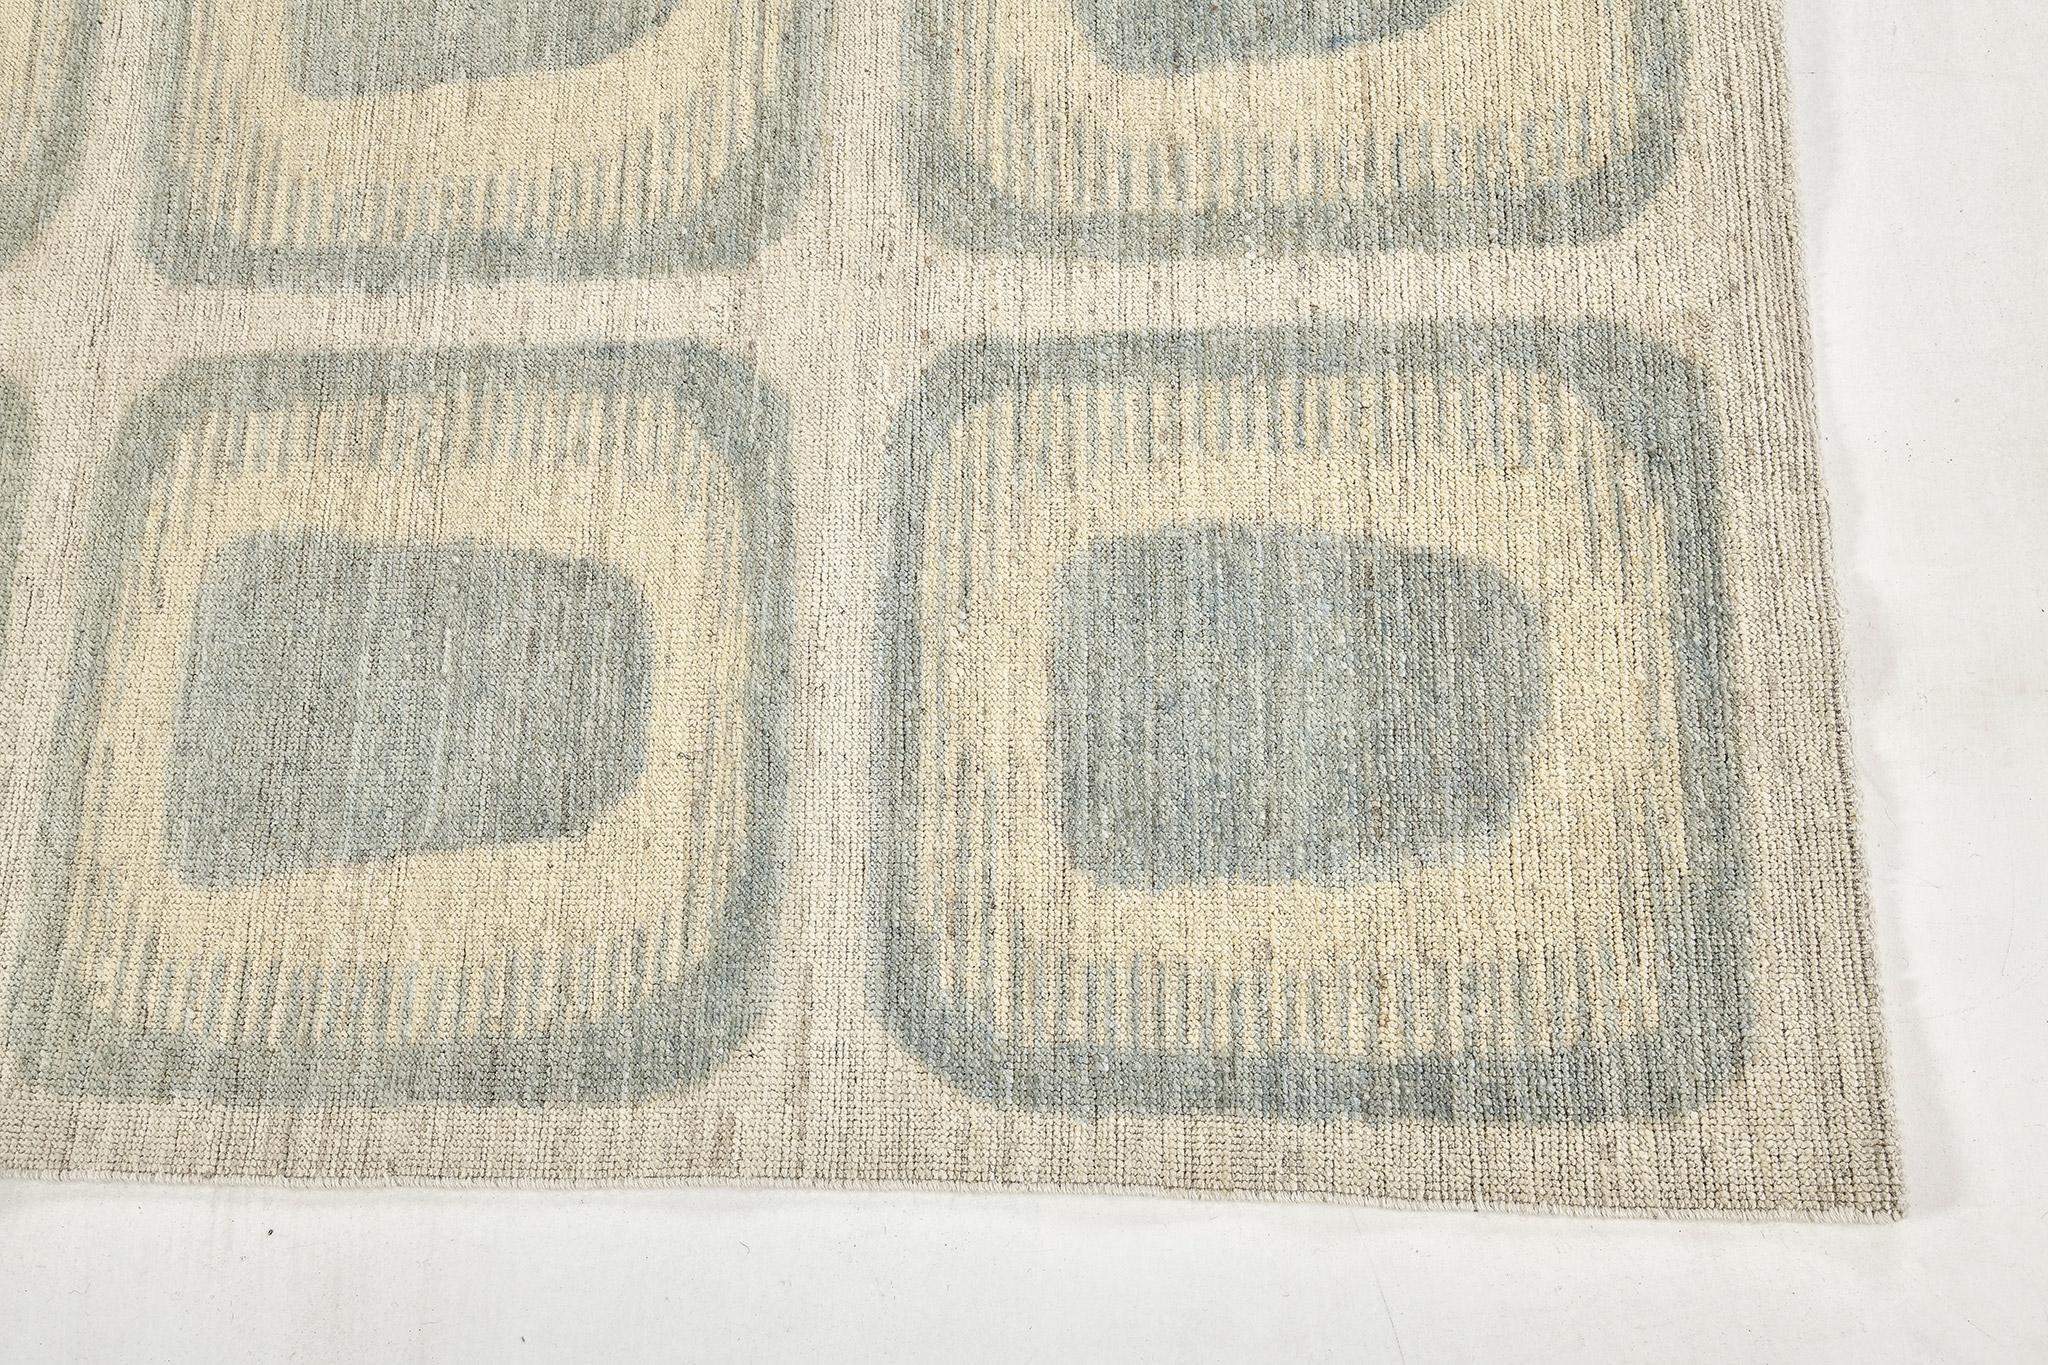 A transitional design rug that features the muted tones of dusty blue and cream. Panel design of bold geometric patterns work together creating an overall sense of symmetry and simplicity. Whether used as an ornamental background element or a